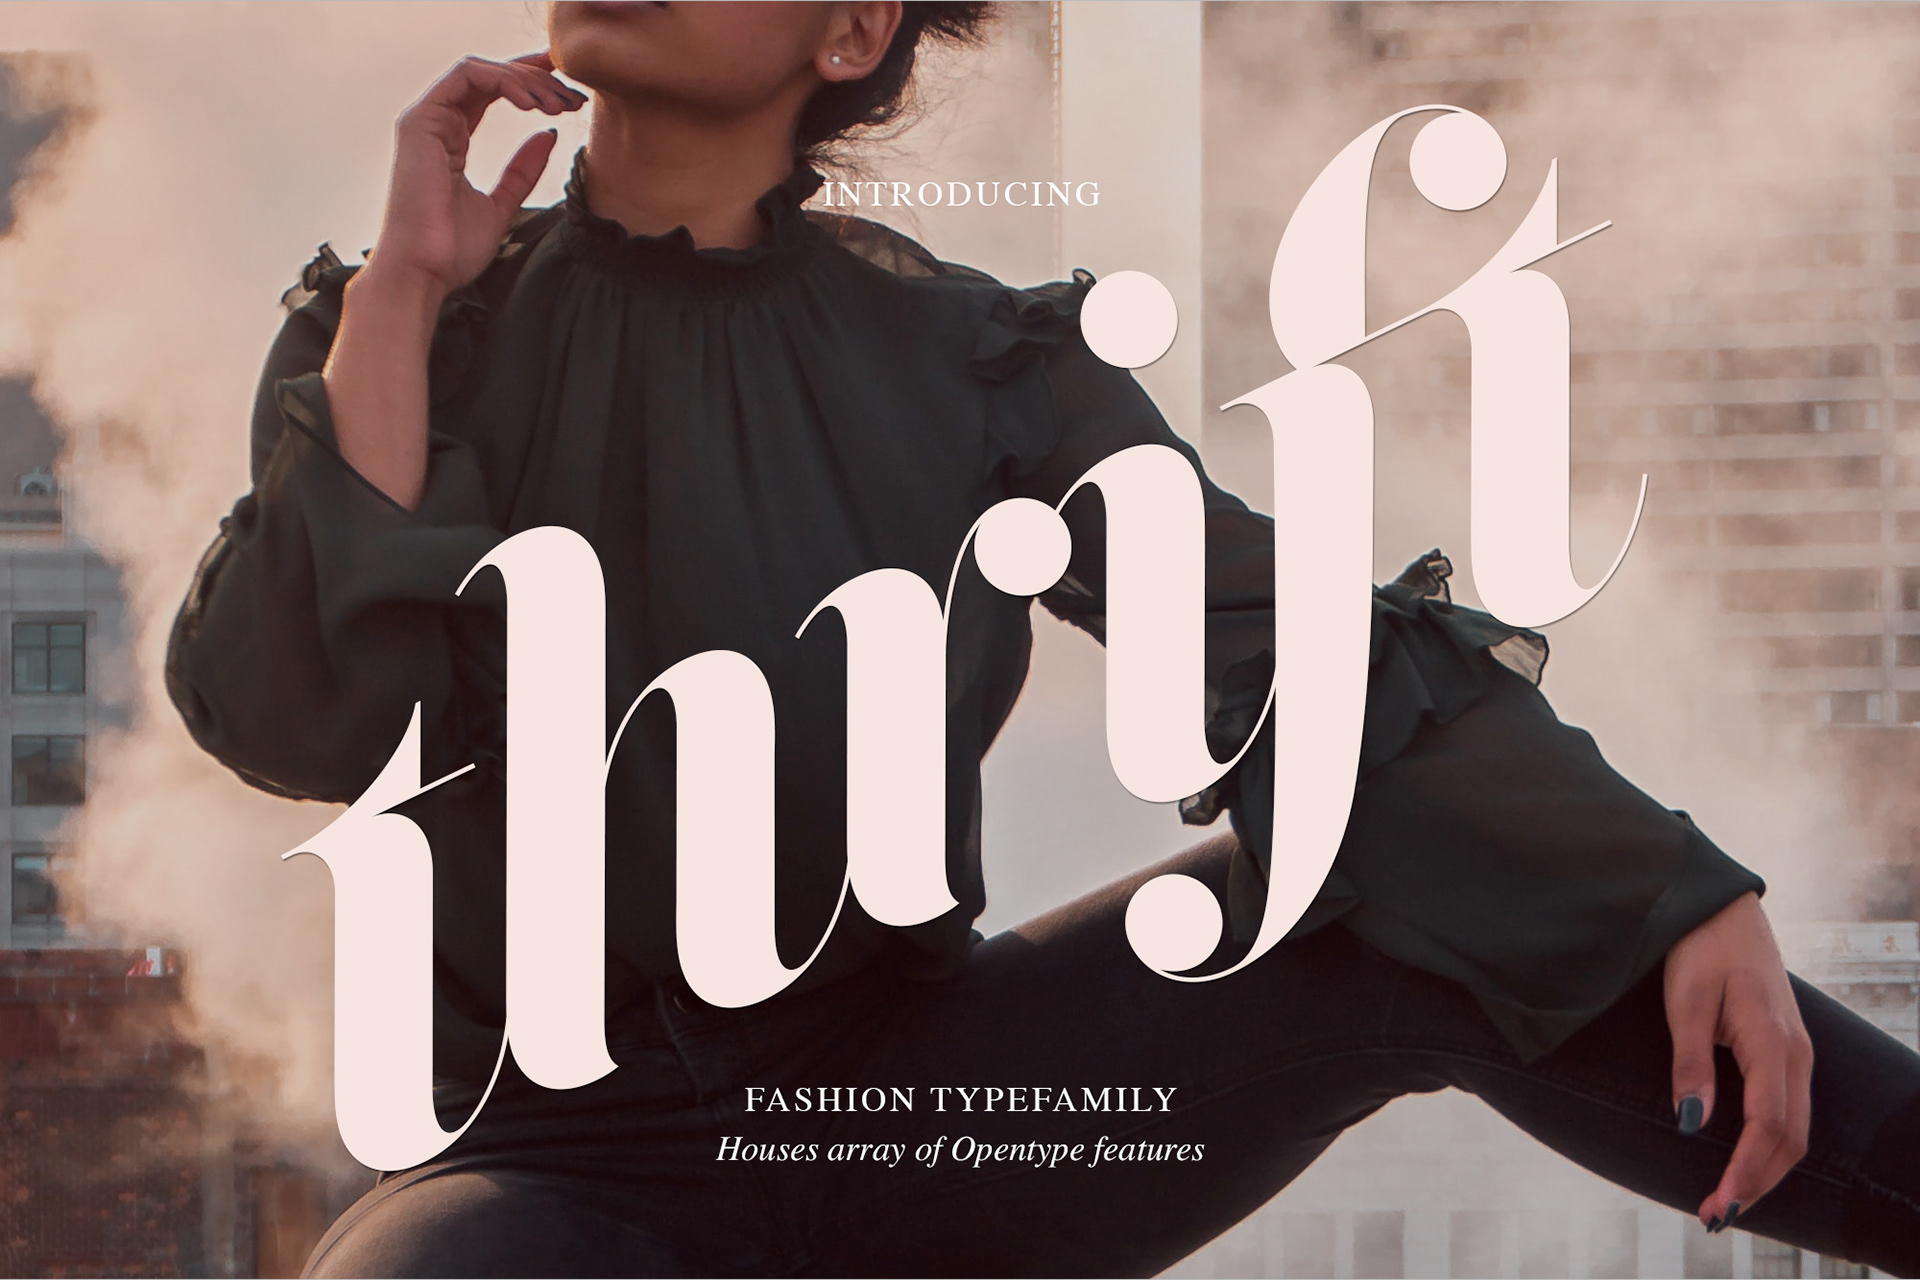 Warm and stylish font for the fashionable ad.